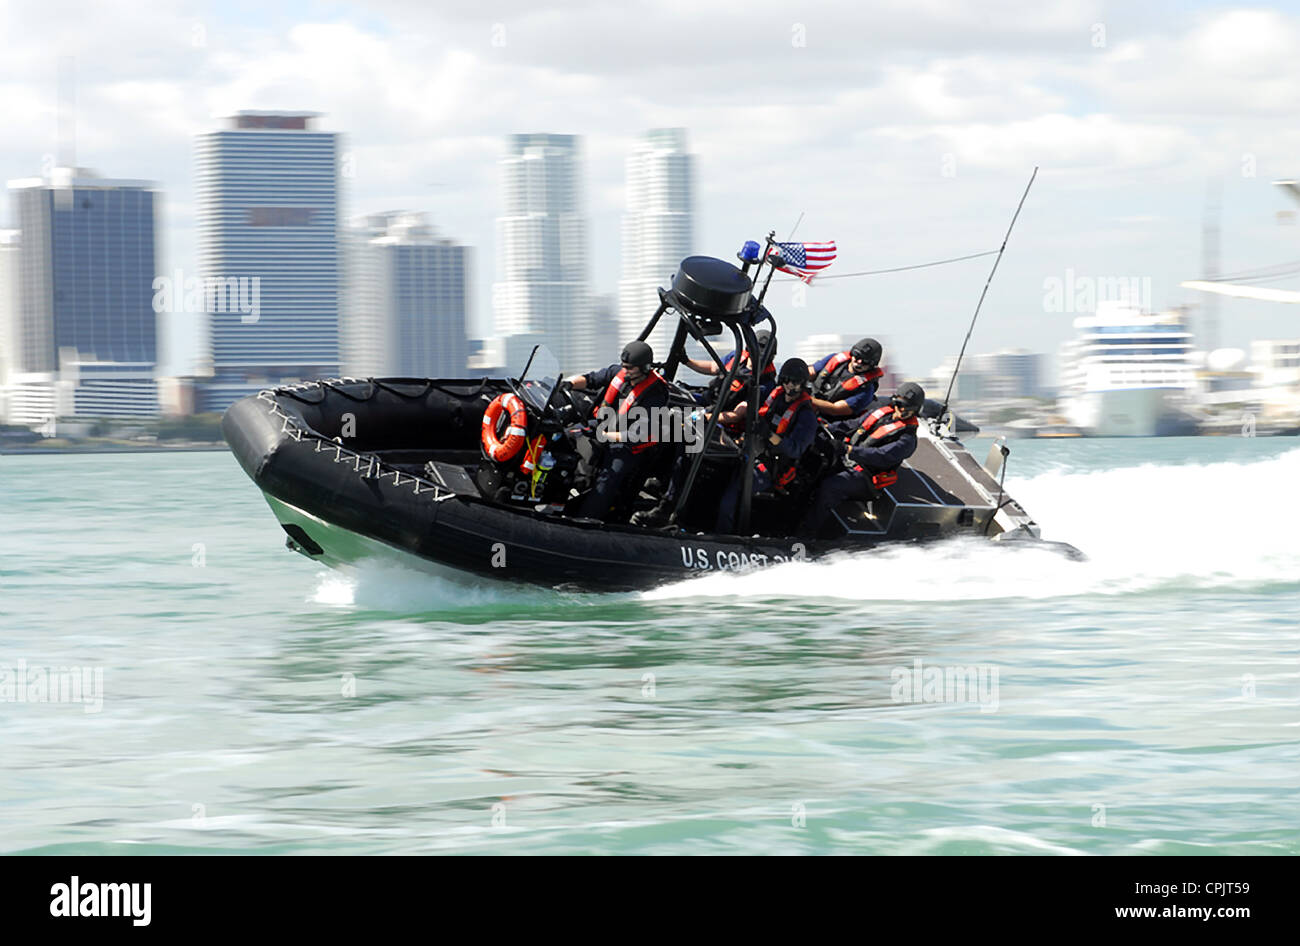 A Coast Guard Maritime Safety and Security Team conducts high-speed maneuvers during a security patrol south of the Port of Miami March 9, 2009 in Miami, Florida. Stock Photo